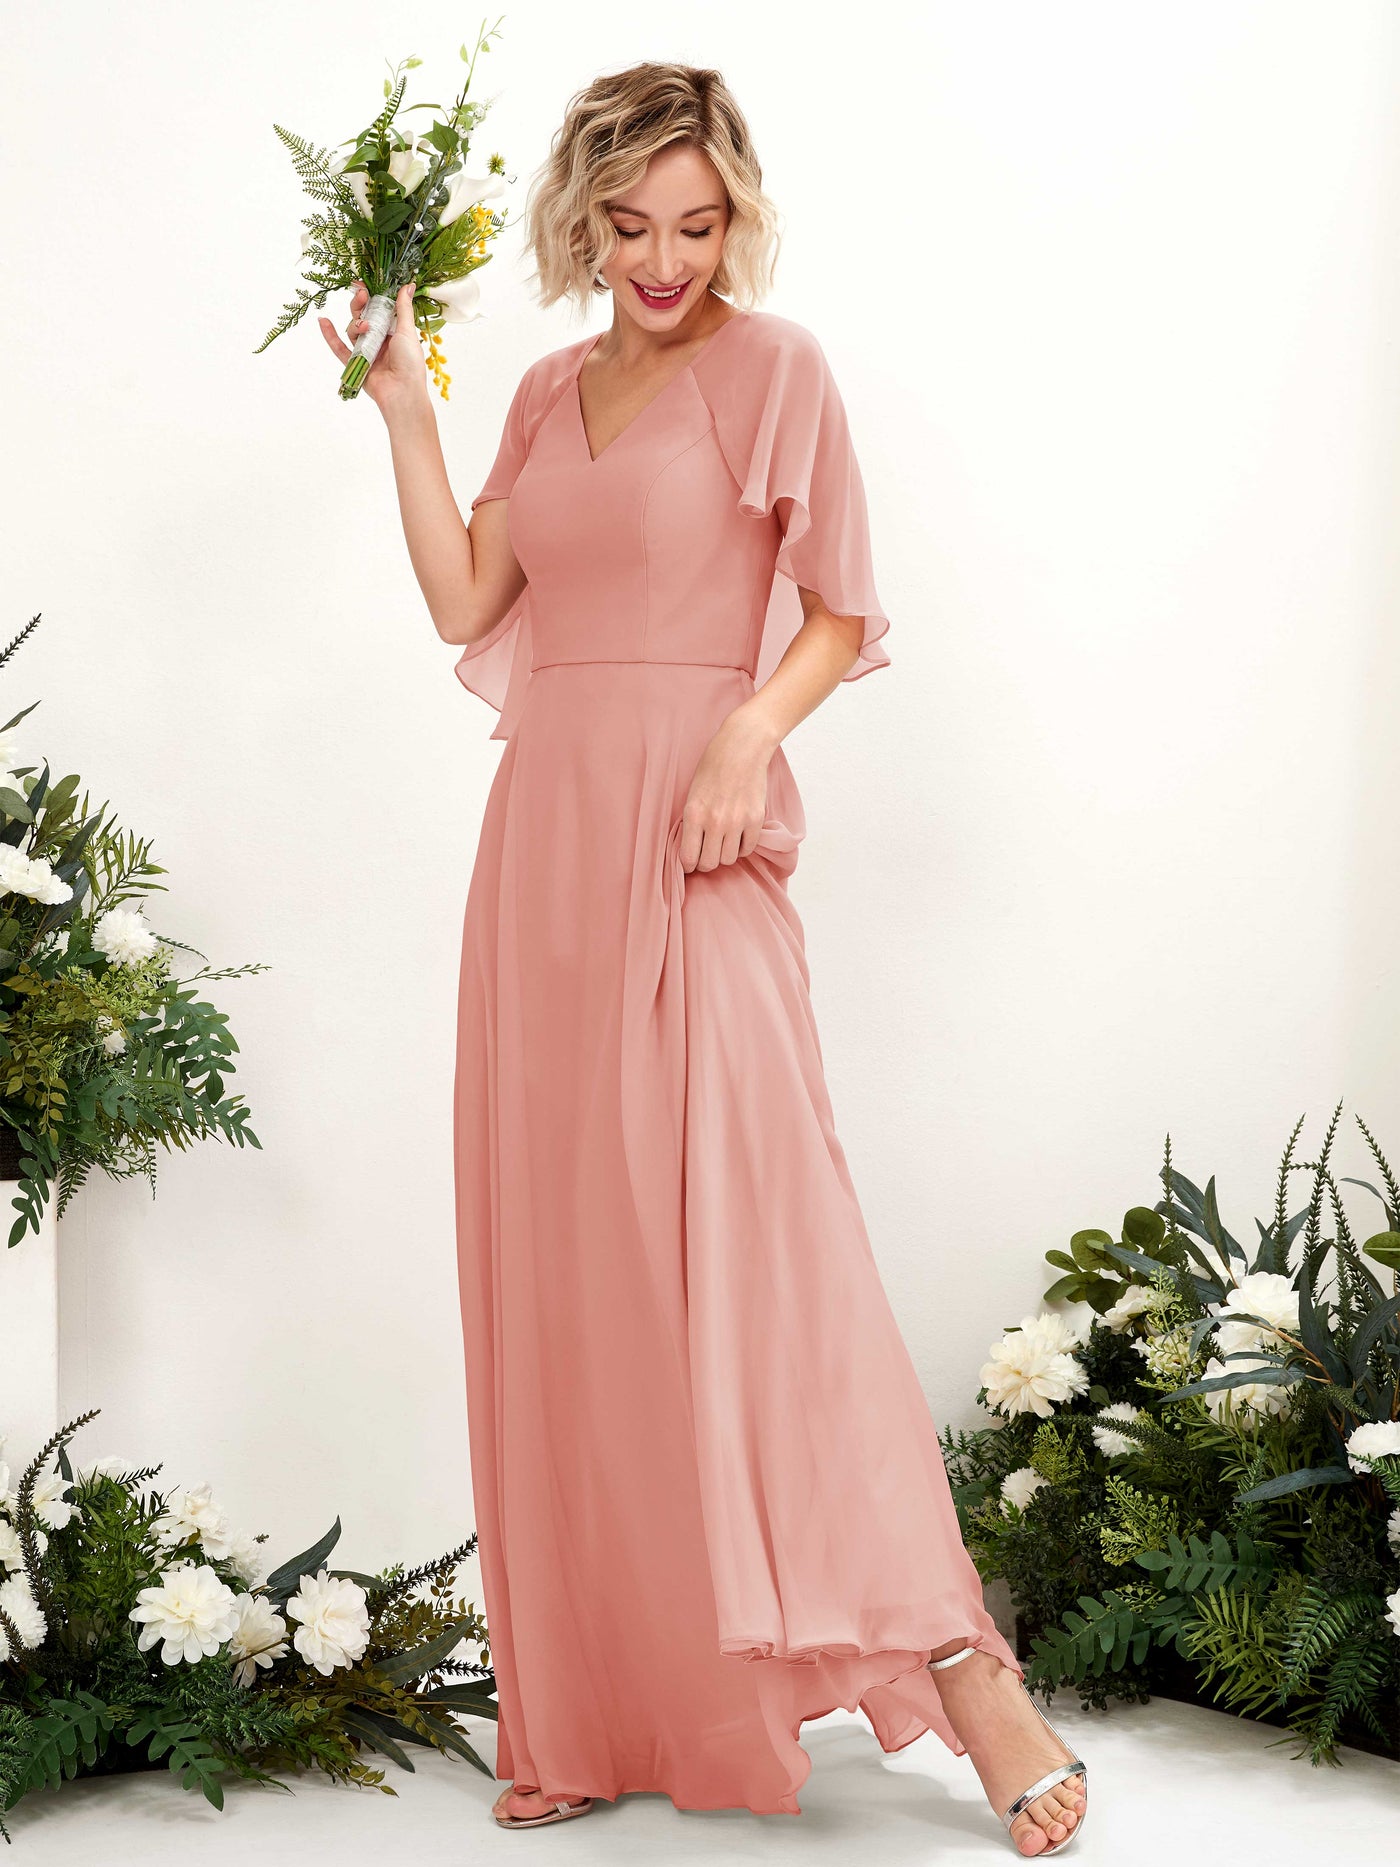 Champagne Rose Bridesmaid Dresses Bridesmaid Dress A-line Chiffon V-neck Full Length Short Sleeves Wedding Party Dress (81224406)#color_champagne-rose